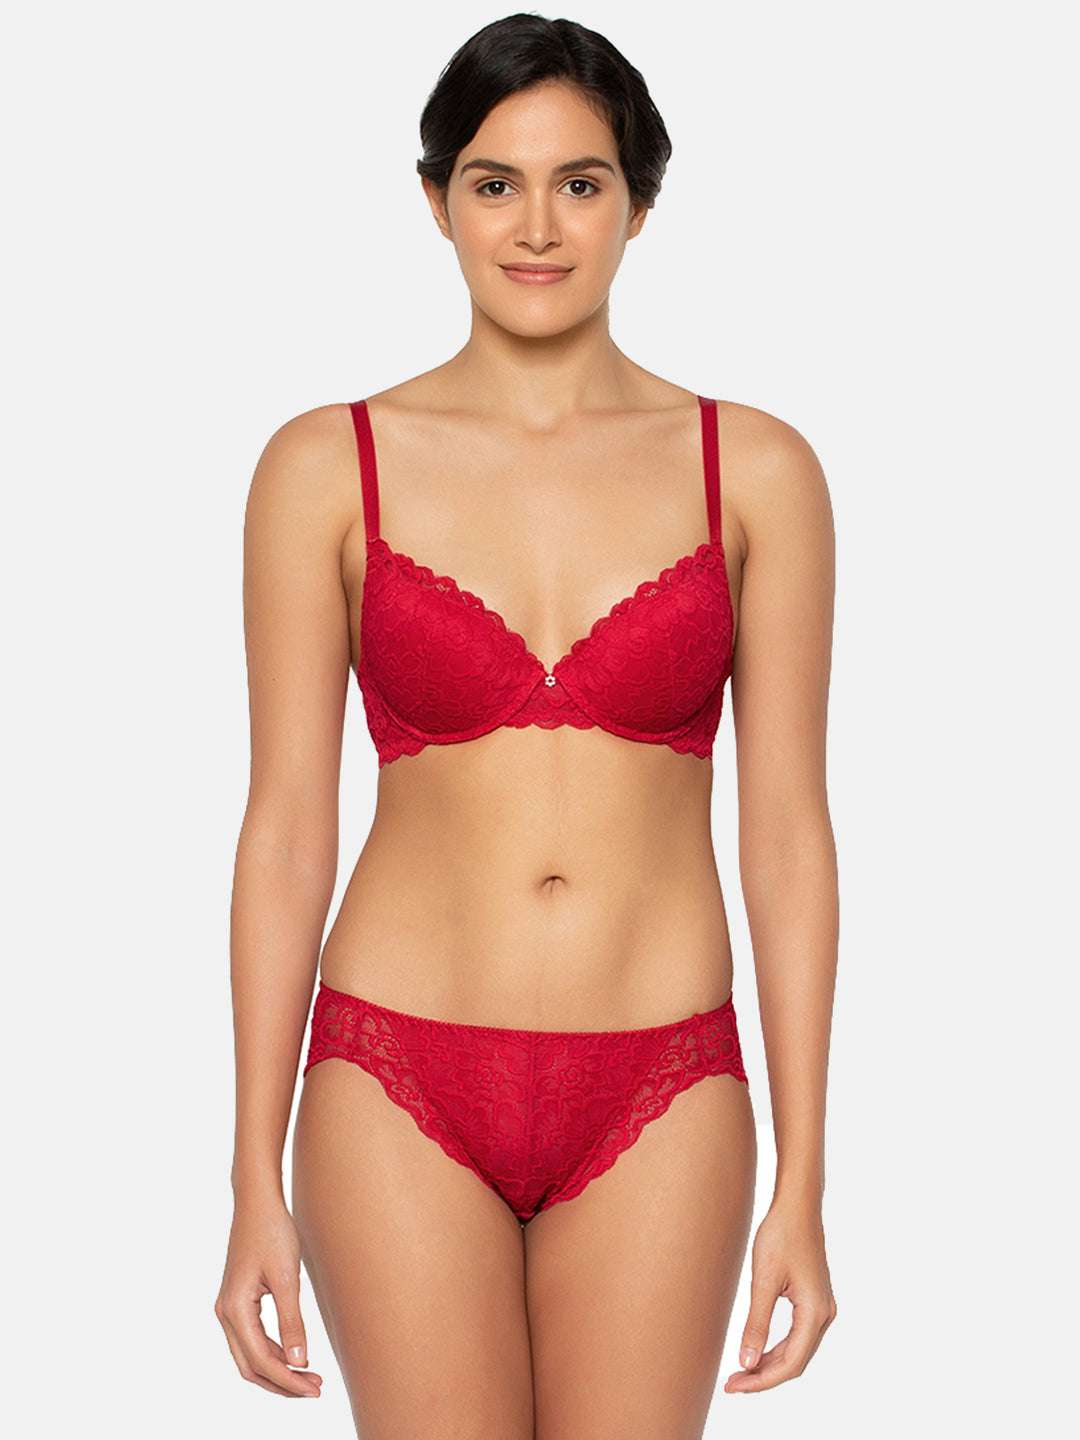 Padded-Wired bras~ New Arrivals~ Available Sizes : 34C - Red